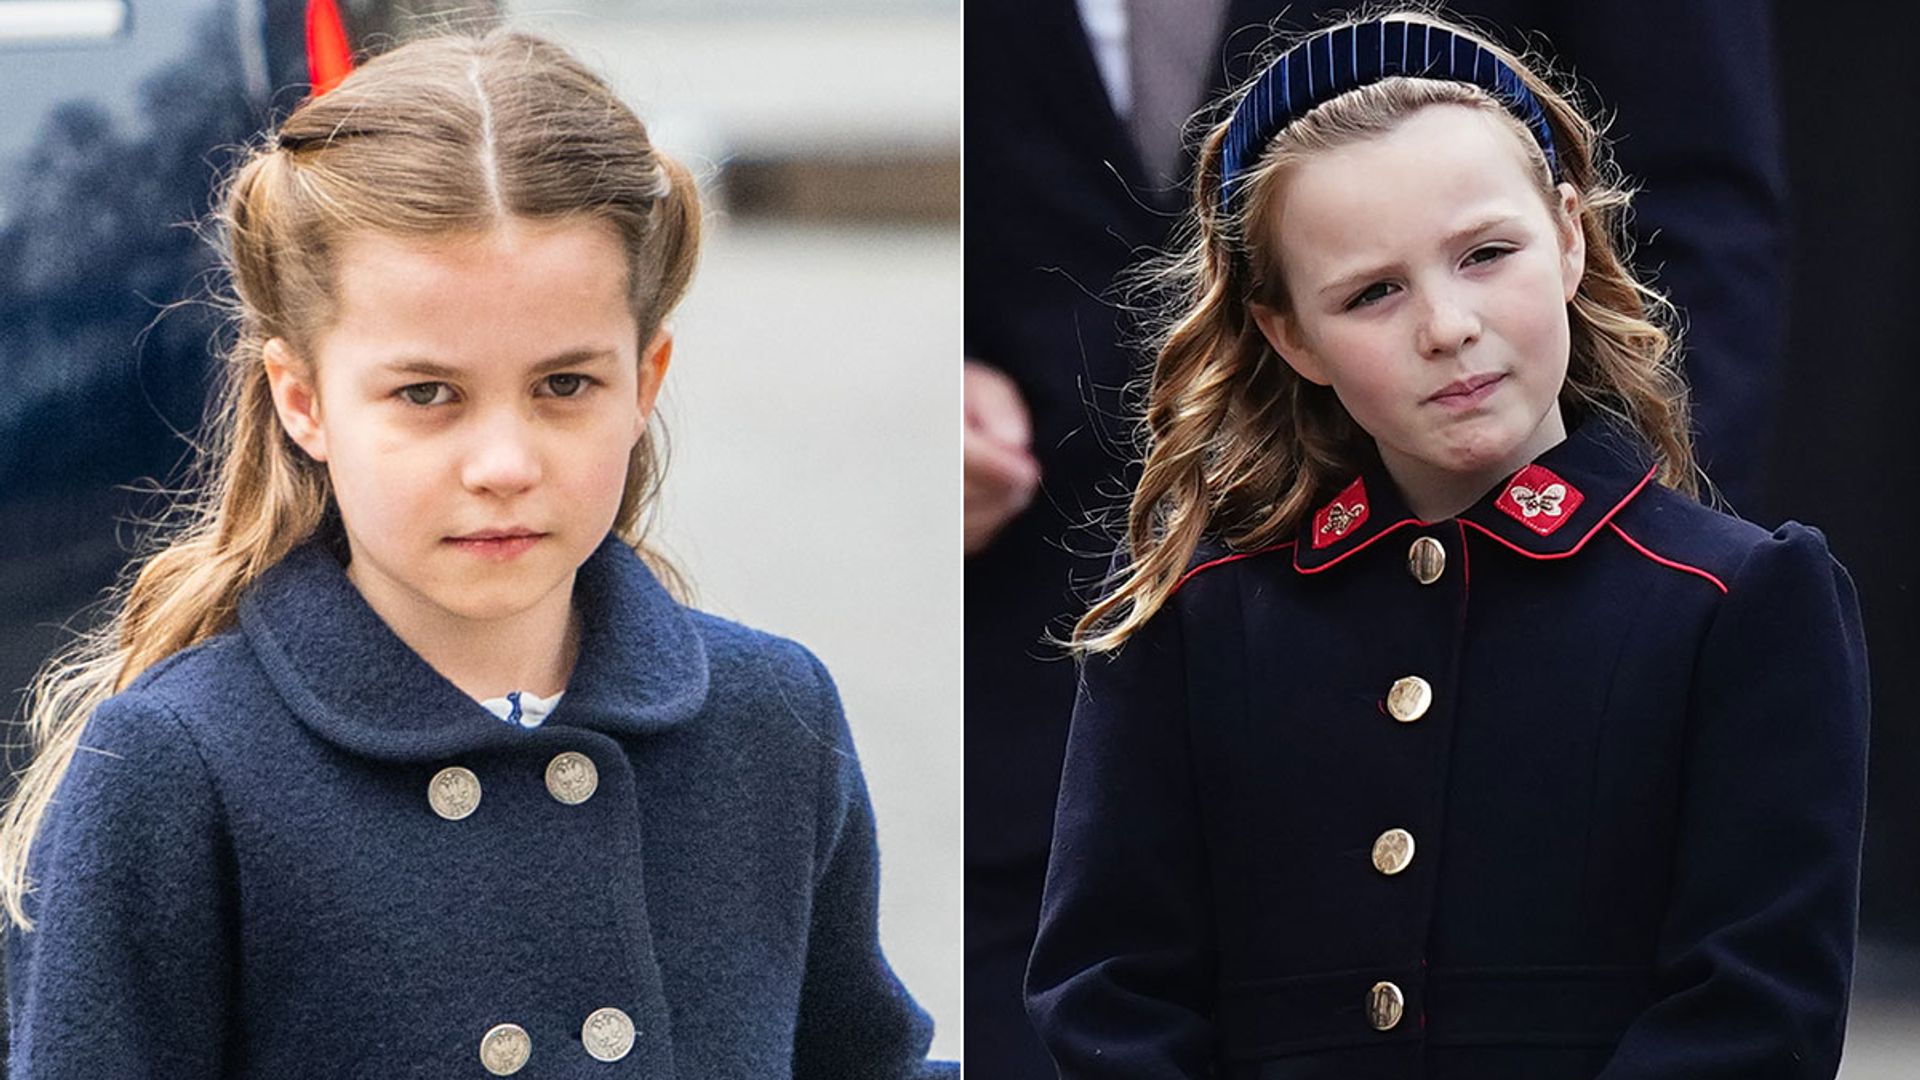 The sweet interaction between Princess Charlotte and Mia Tindall that almost went unnoticed - watch